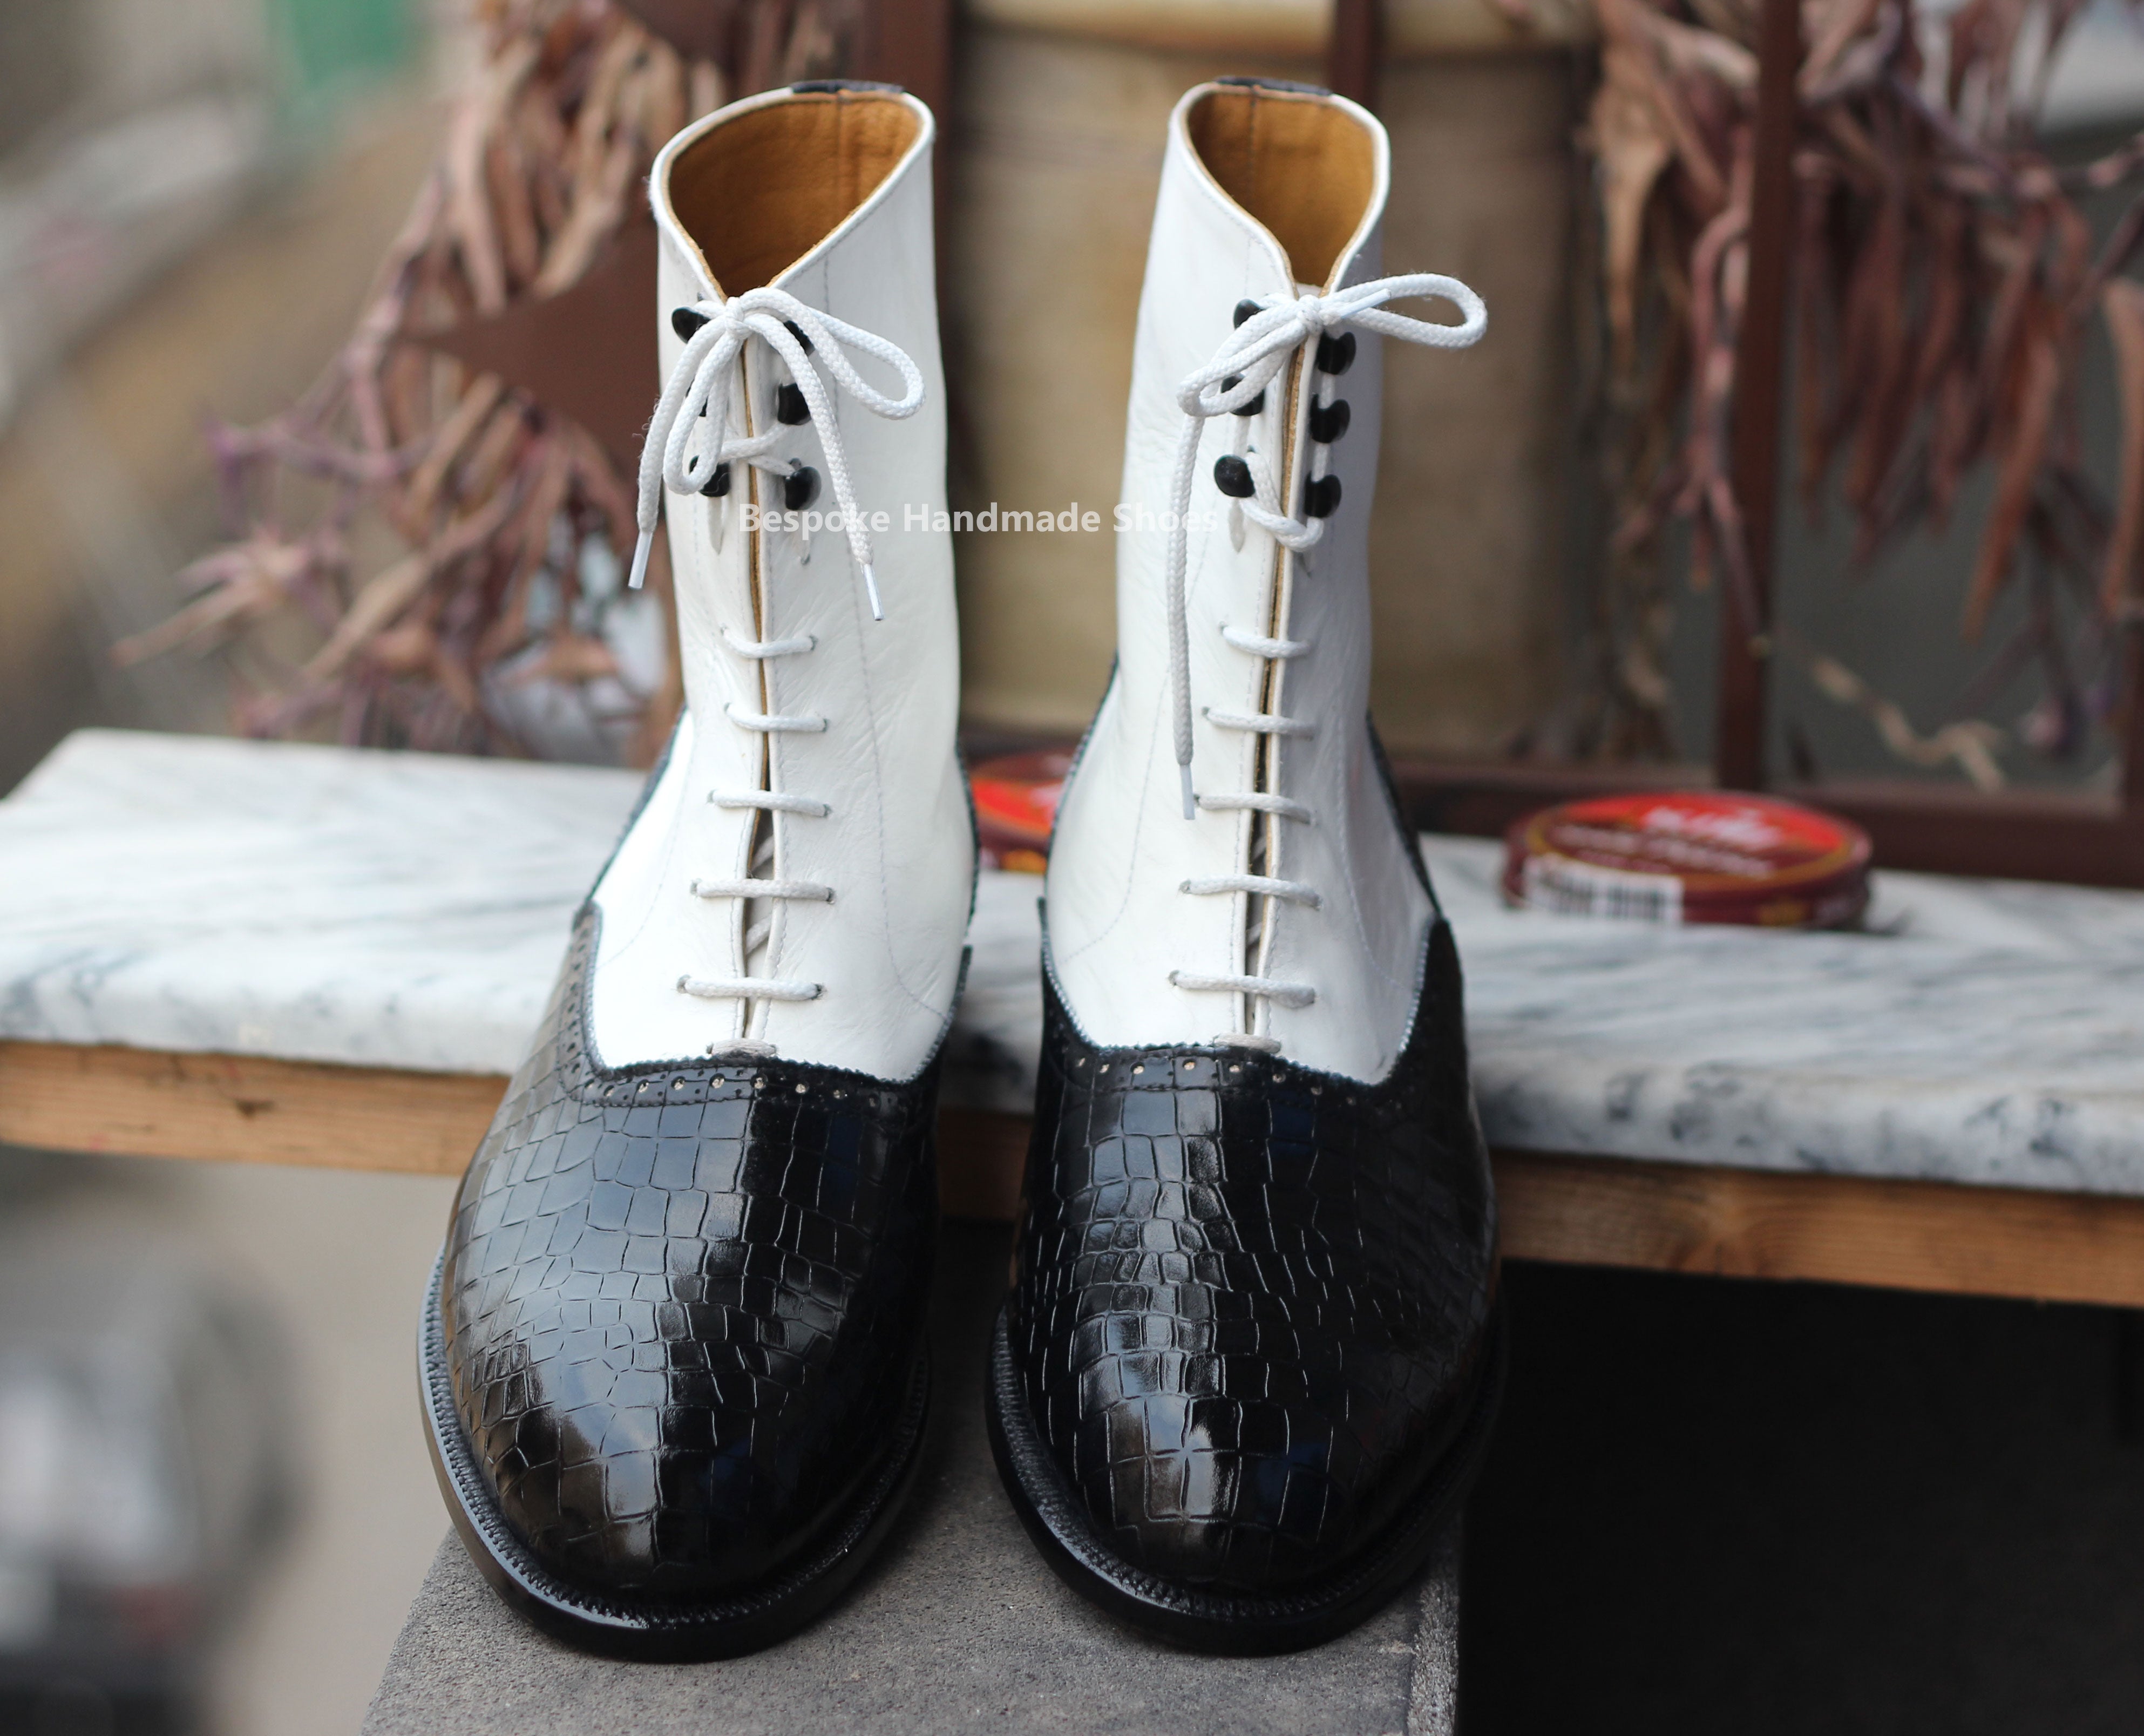 Bespoke Handmade Men's Black Alligator Leather, White Leather Oxford Lace Up High Ankle Formal Boots Men